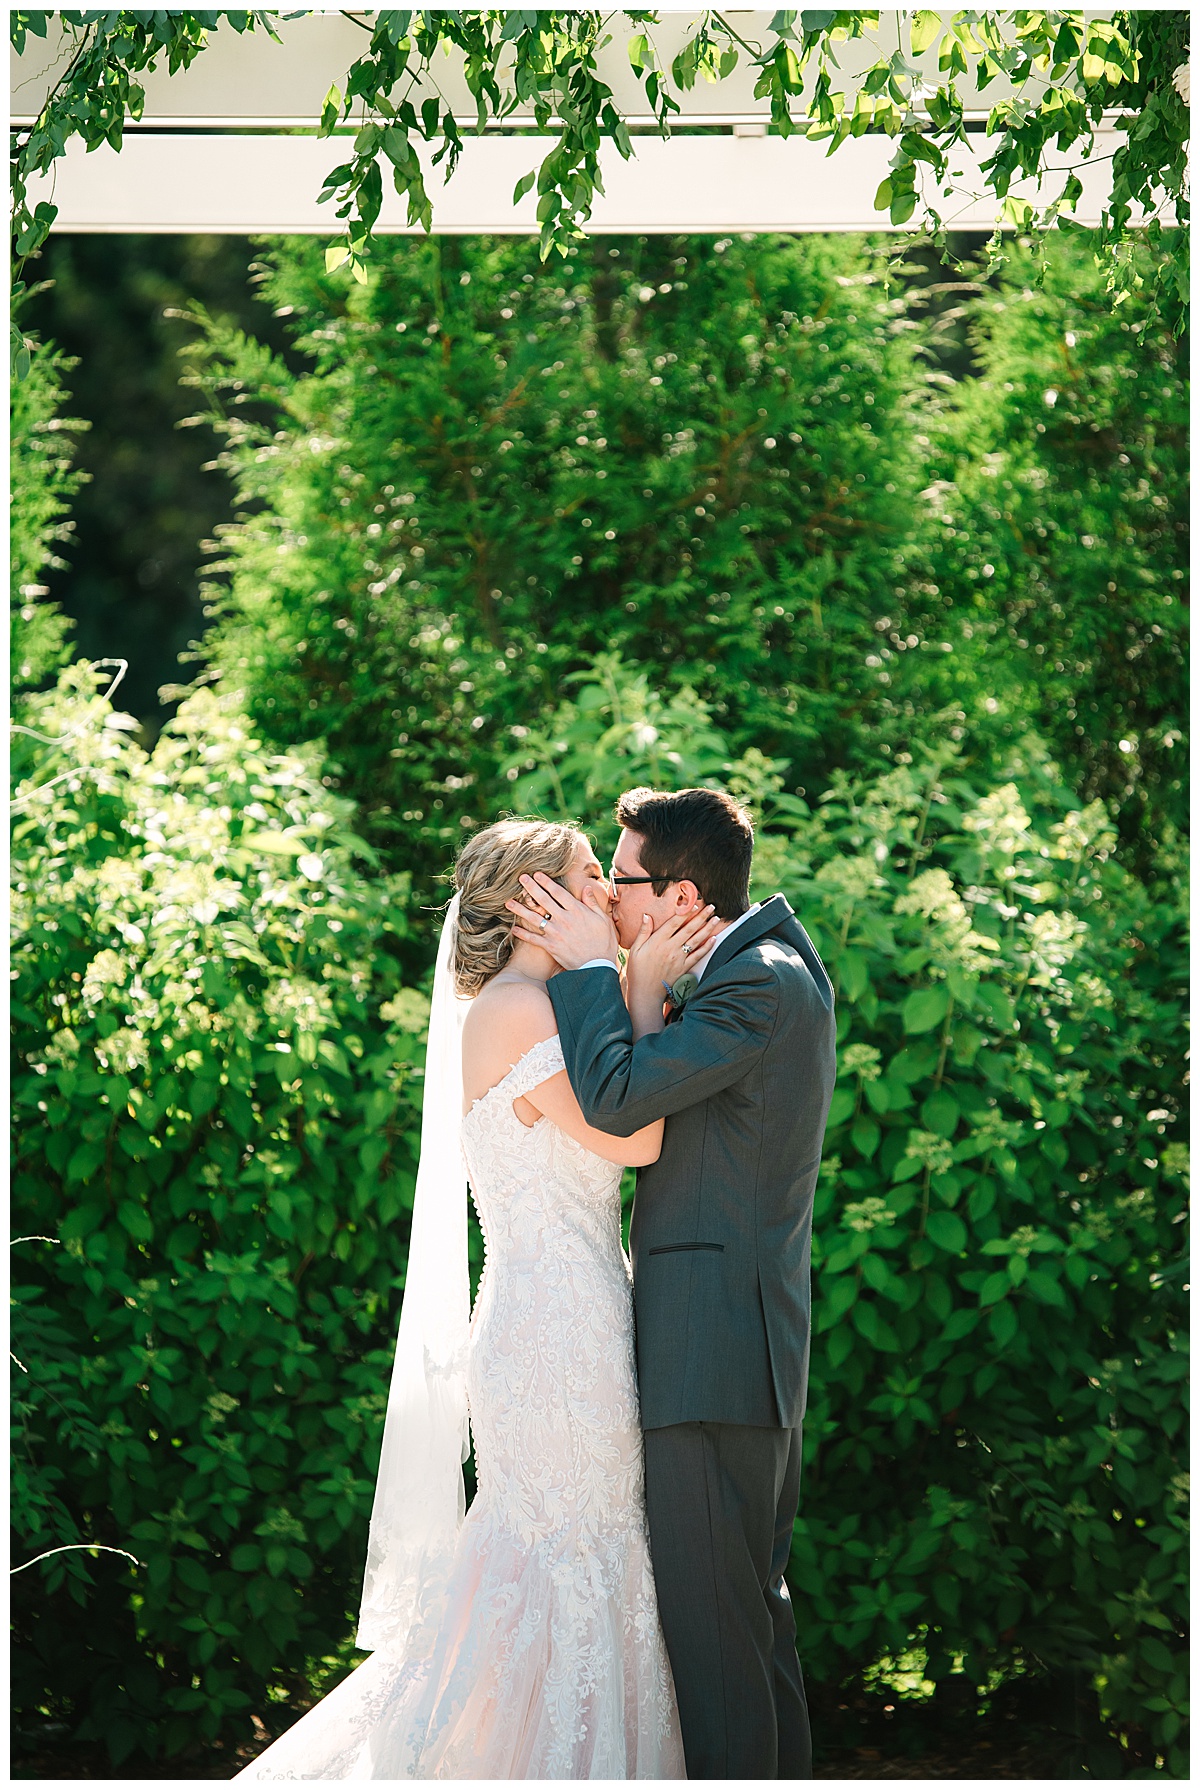 First kiss for bride and groom by Brittany Emerson Photography